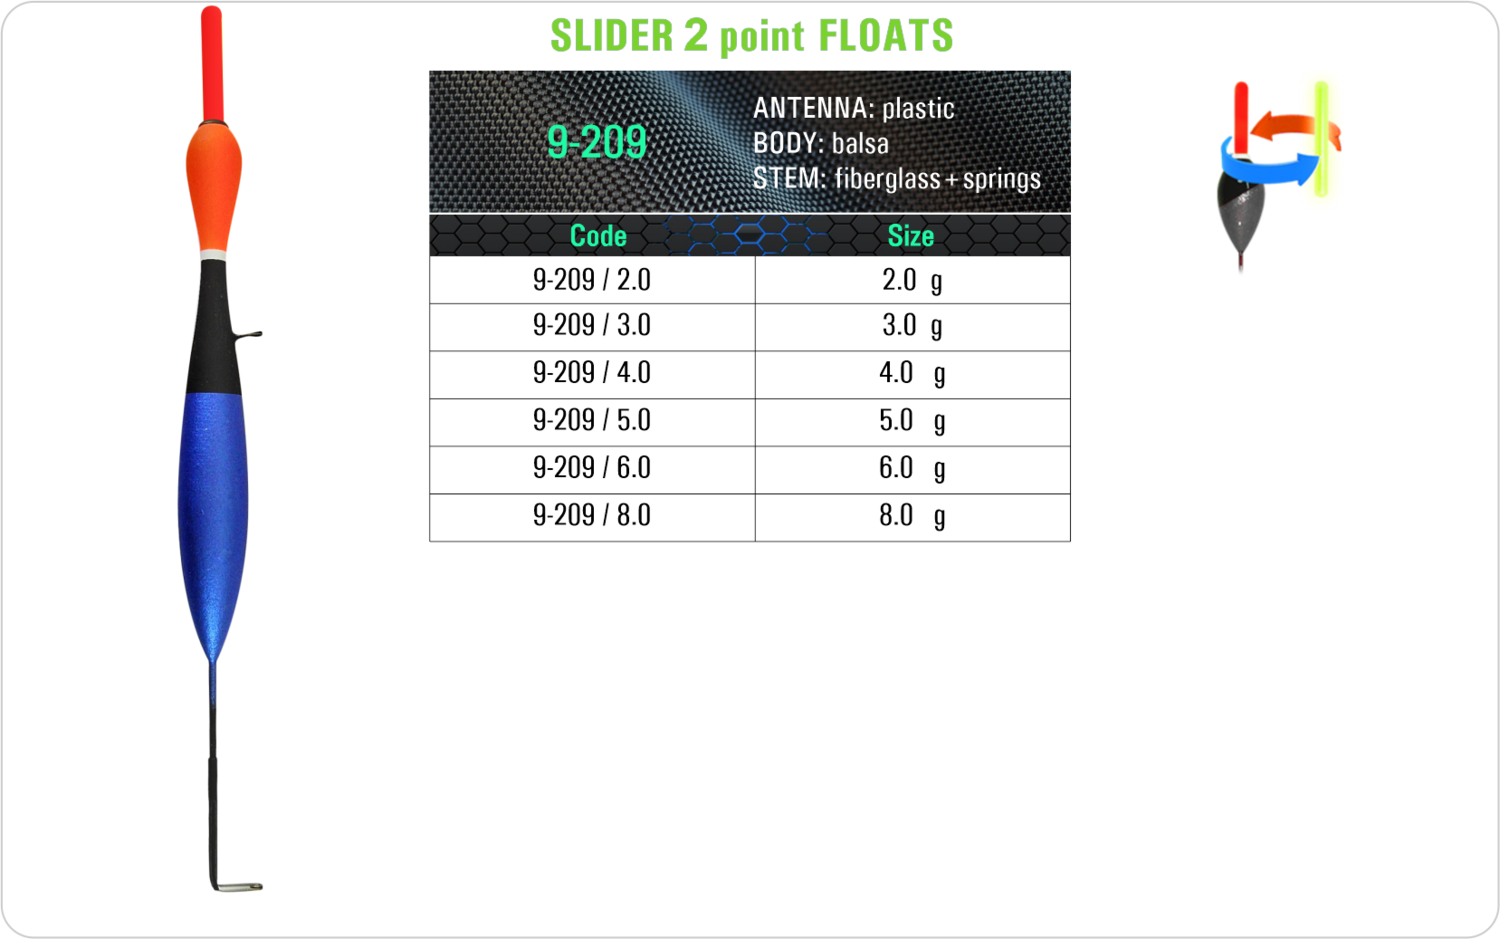 SF 9-209 - Lake and river float model and table containing an additional information about this float with different codes, sizes, types of the body, the stem and the antenna of the float.